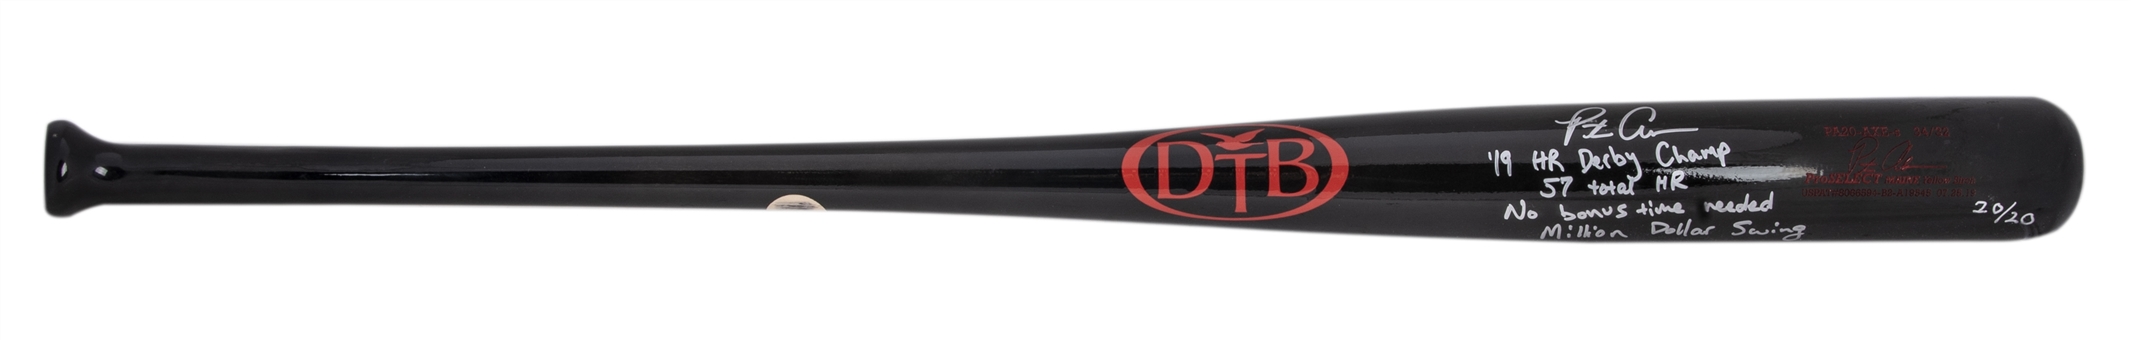 2019 Pete Alonso Signed & Multi Inscribed DTB "Haleys Comet" Home Run Derby Bat - 20/20 (MLB Authenticated & Fanatics)